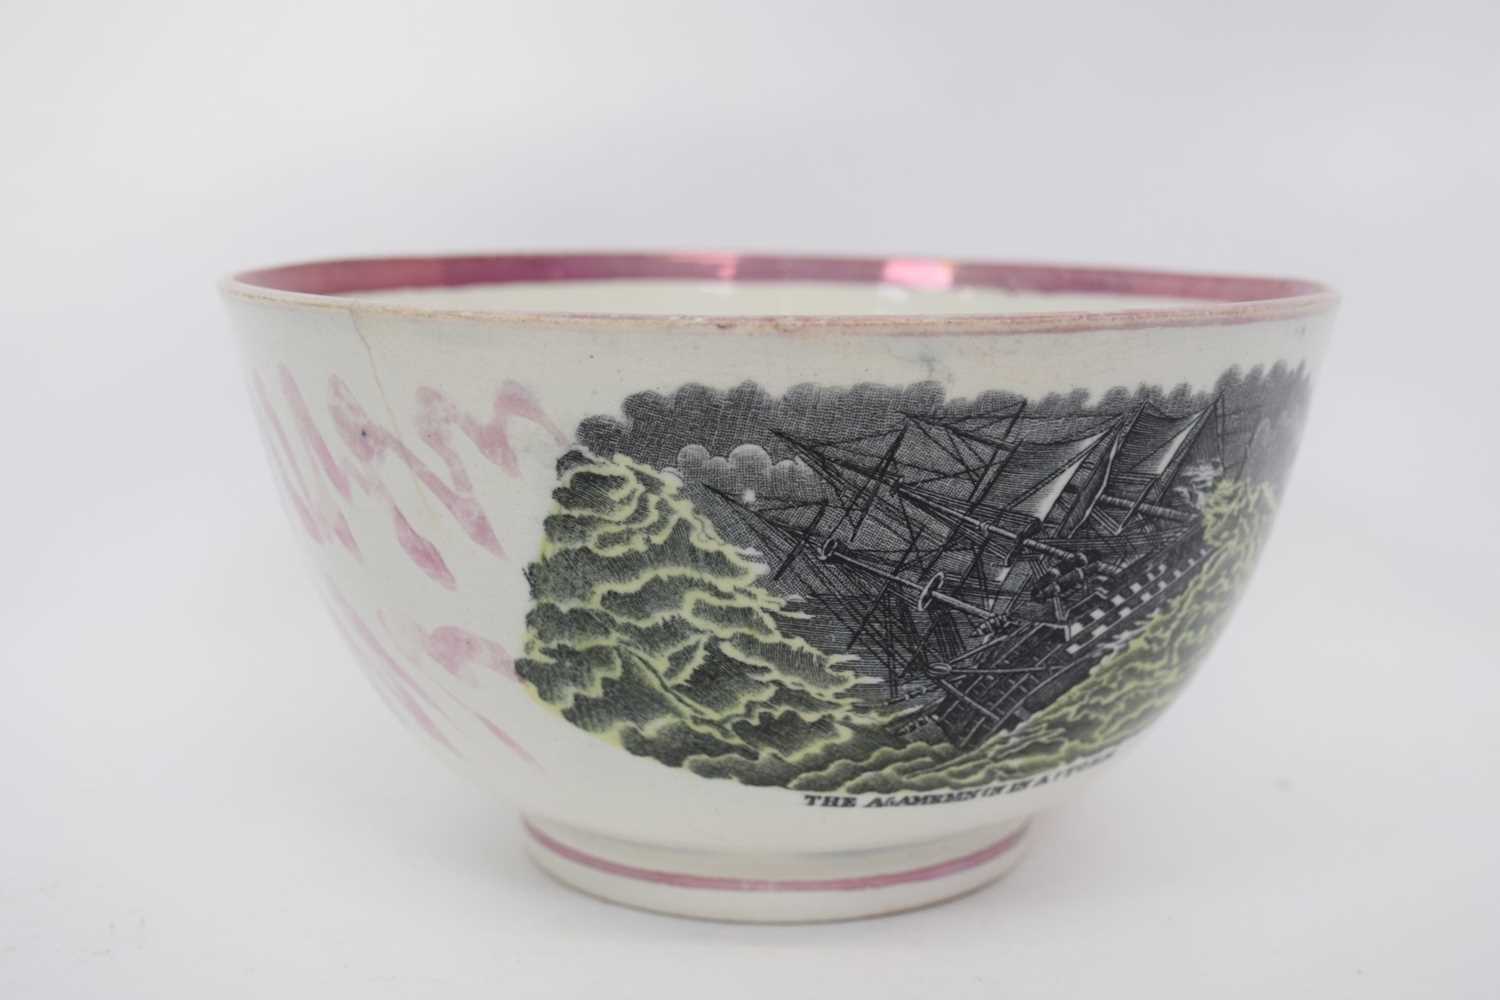 Sunderland lustre bowl with a view of Sunderland Bridge and the Agamemnon in a storm verso, 19cm - Image 2 of 5